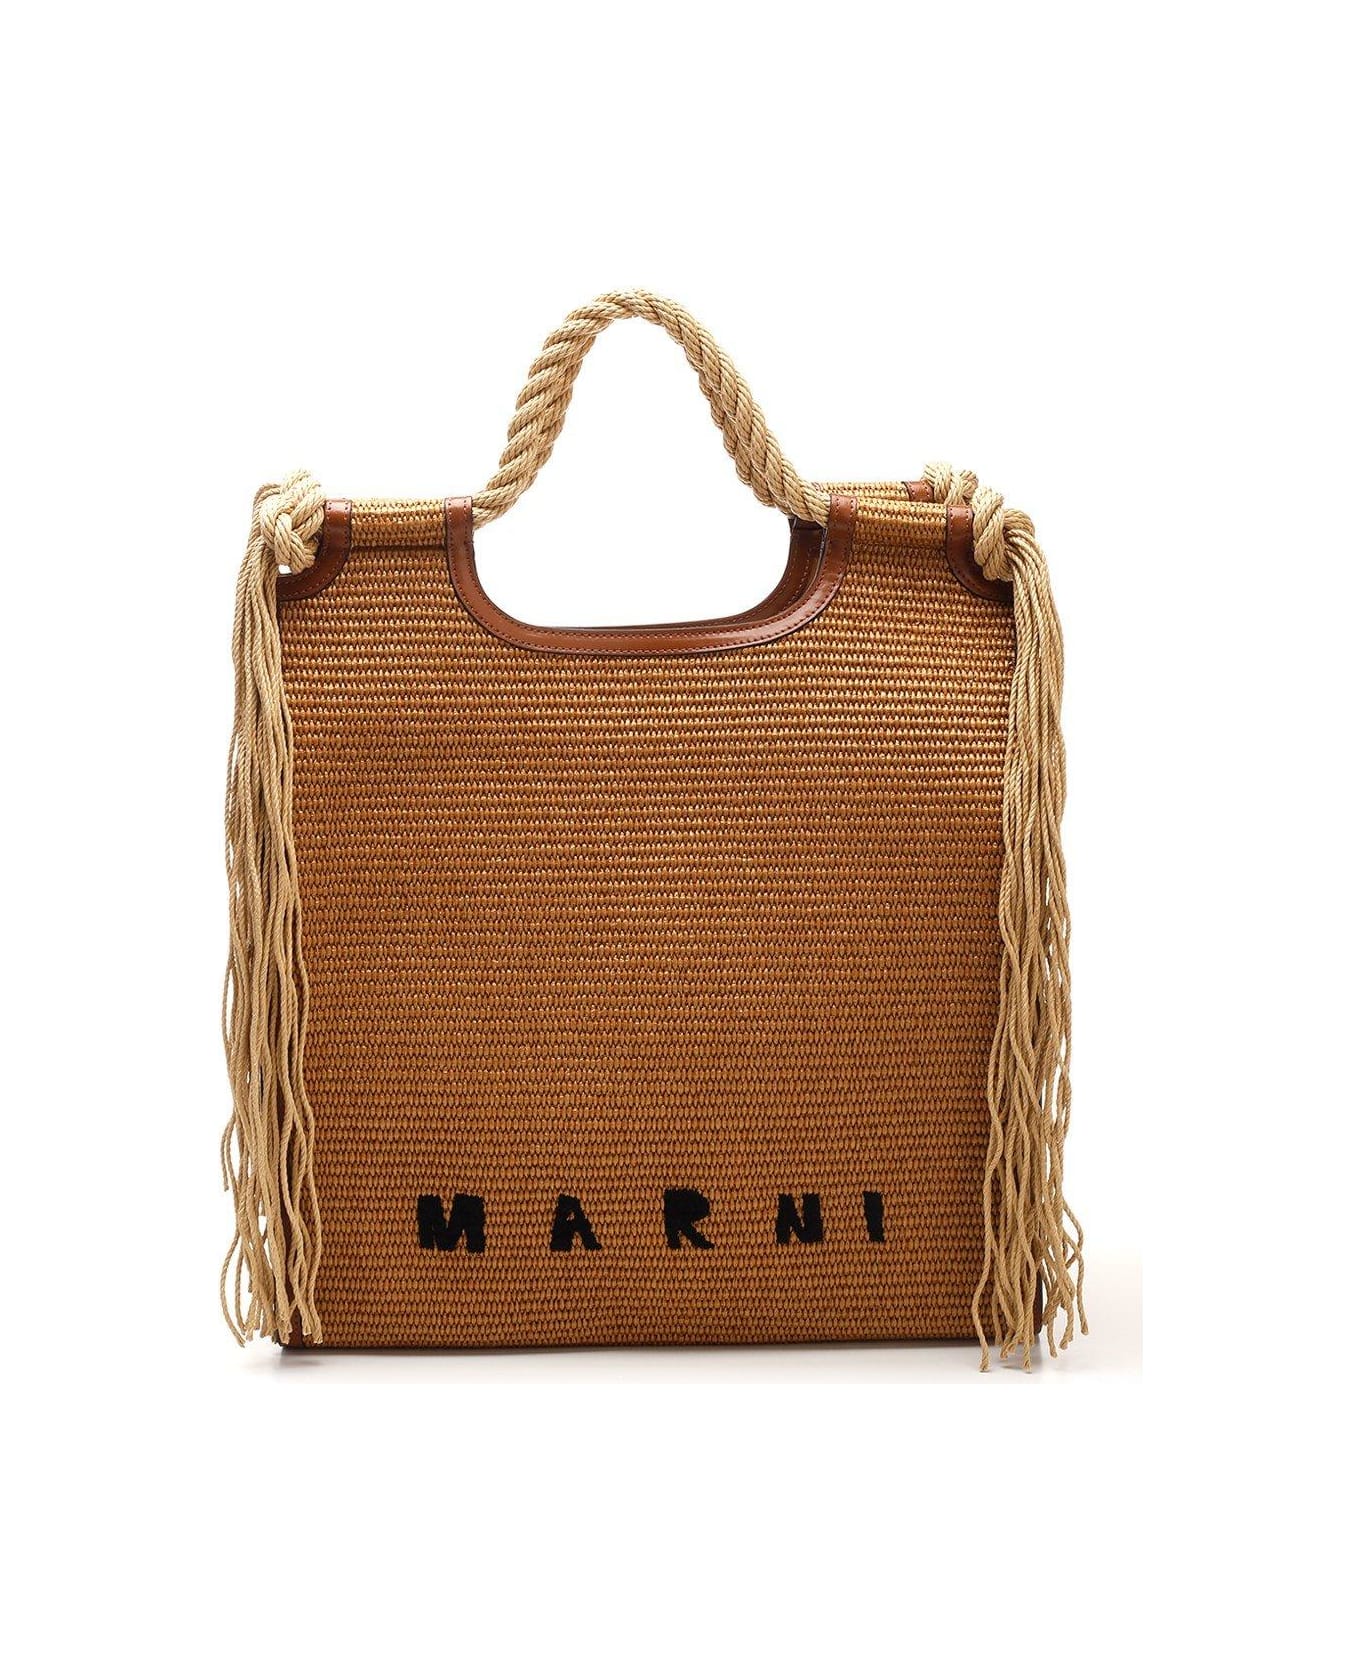 Marni Marcel North-south Fringed Tote Bag - Marrone トートバッグ